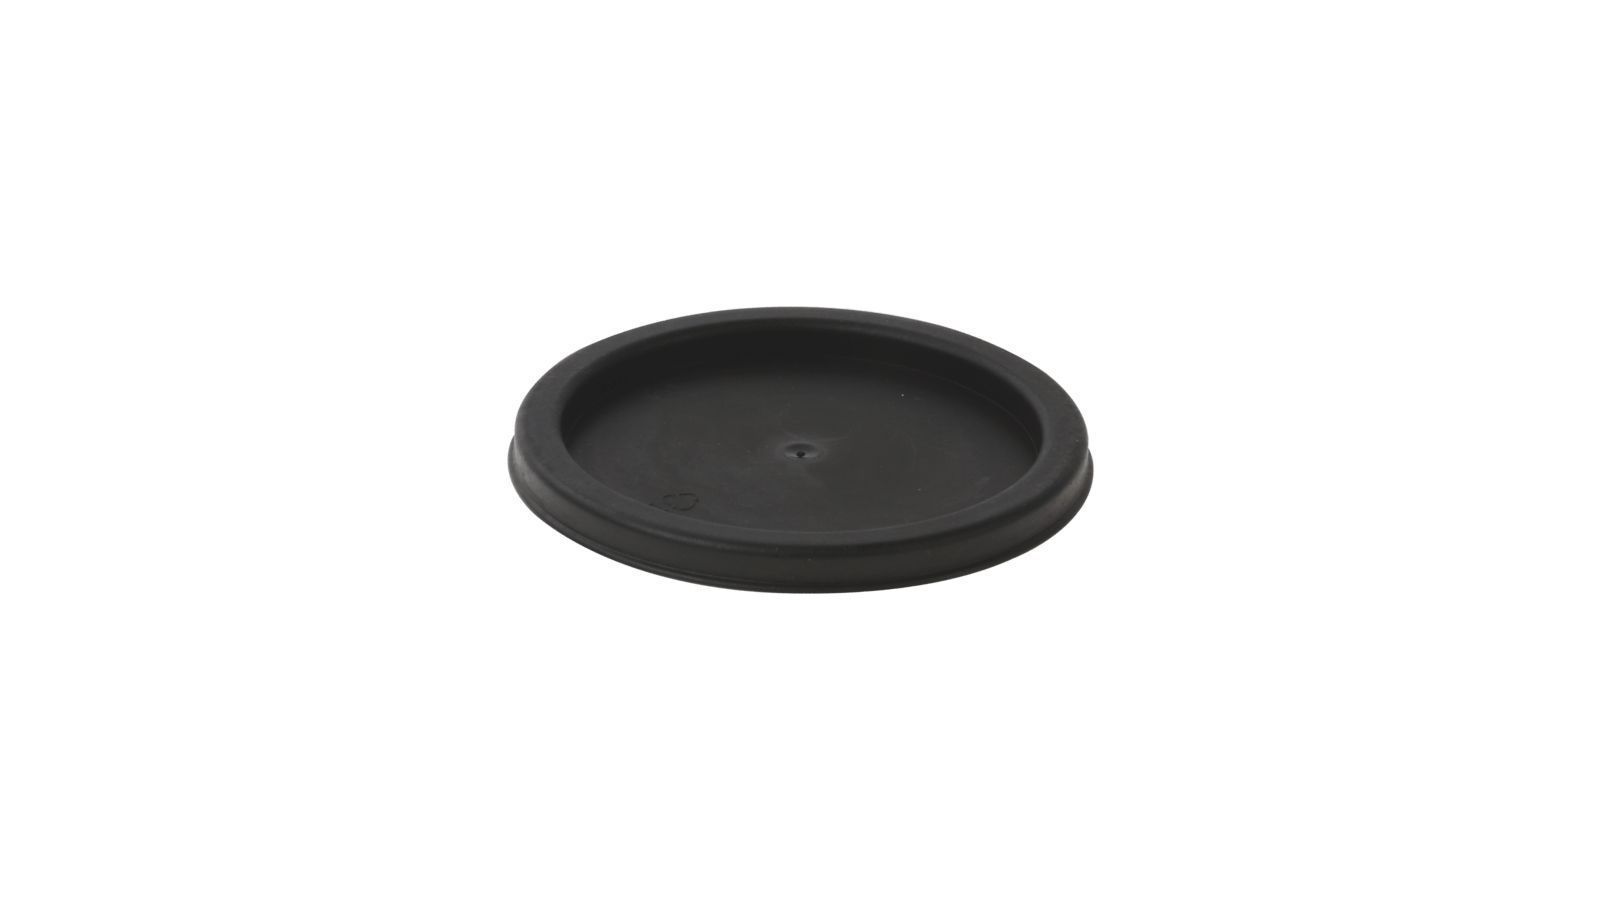 Container Lid for Bosch Siemens Blenders - 00630718 BSH